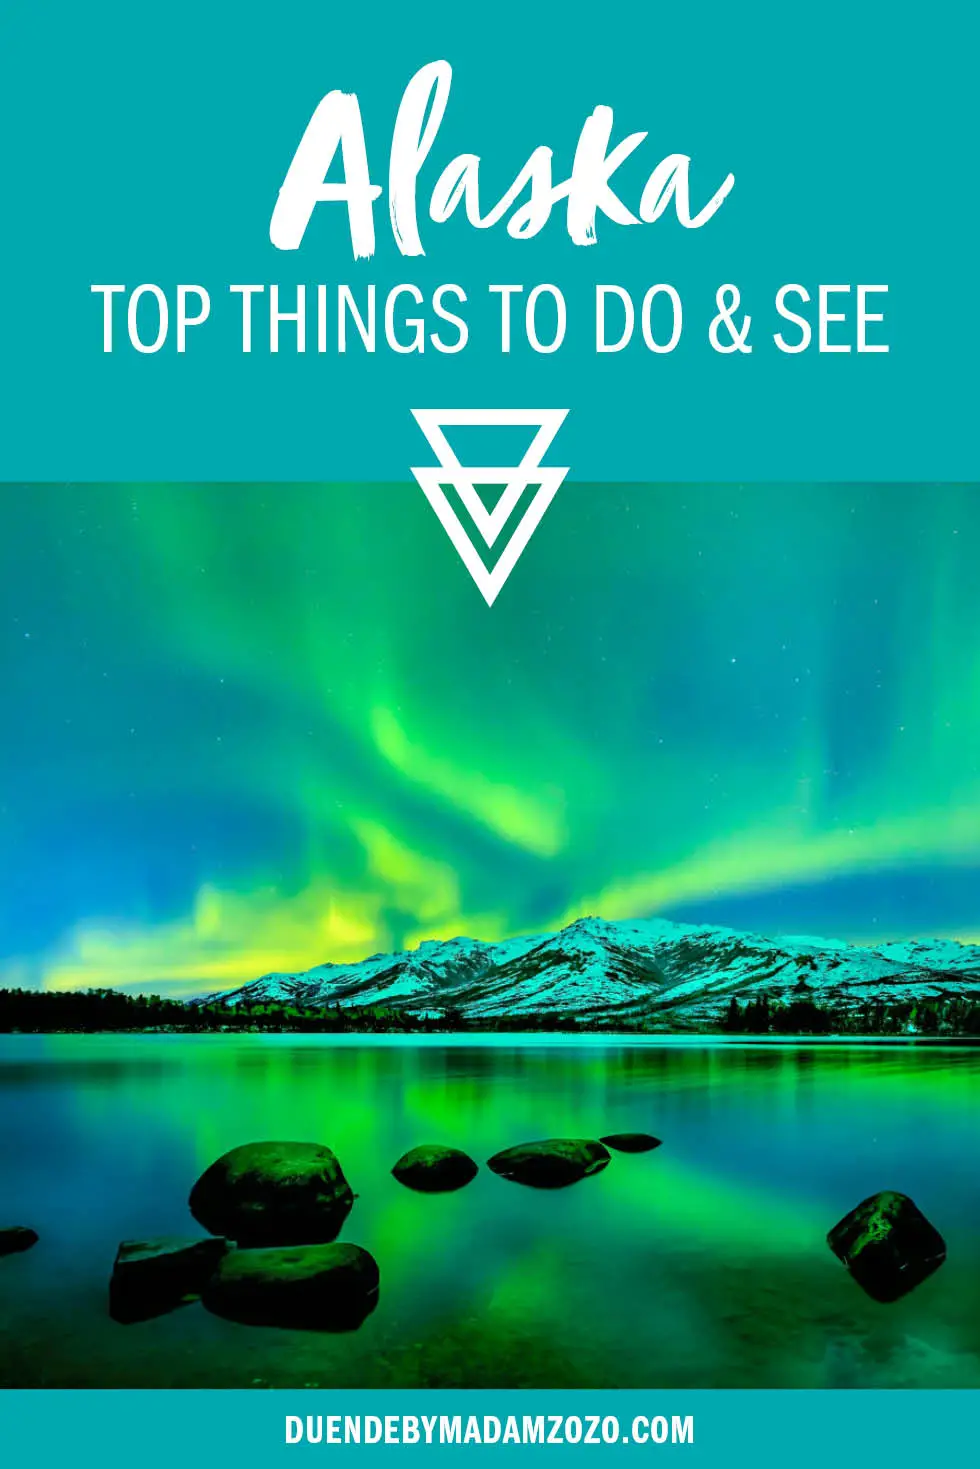 Alaska: Top Things to do and see with image of aurora borealis over snowy moutains and lake